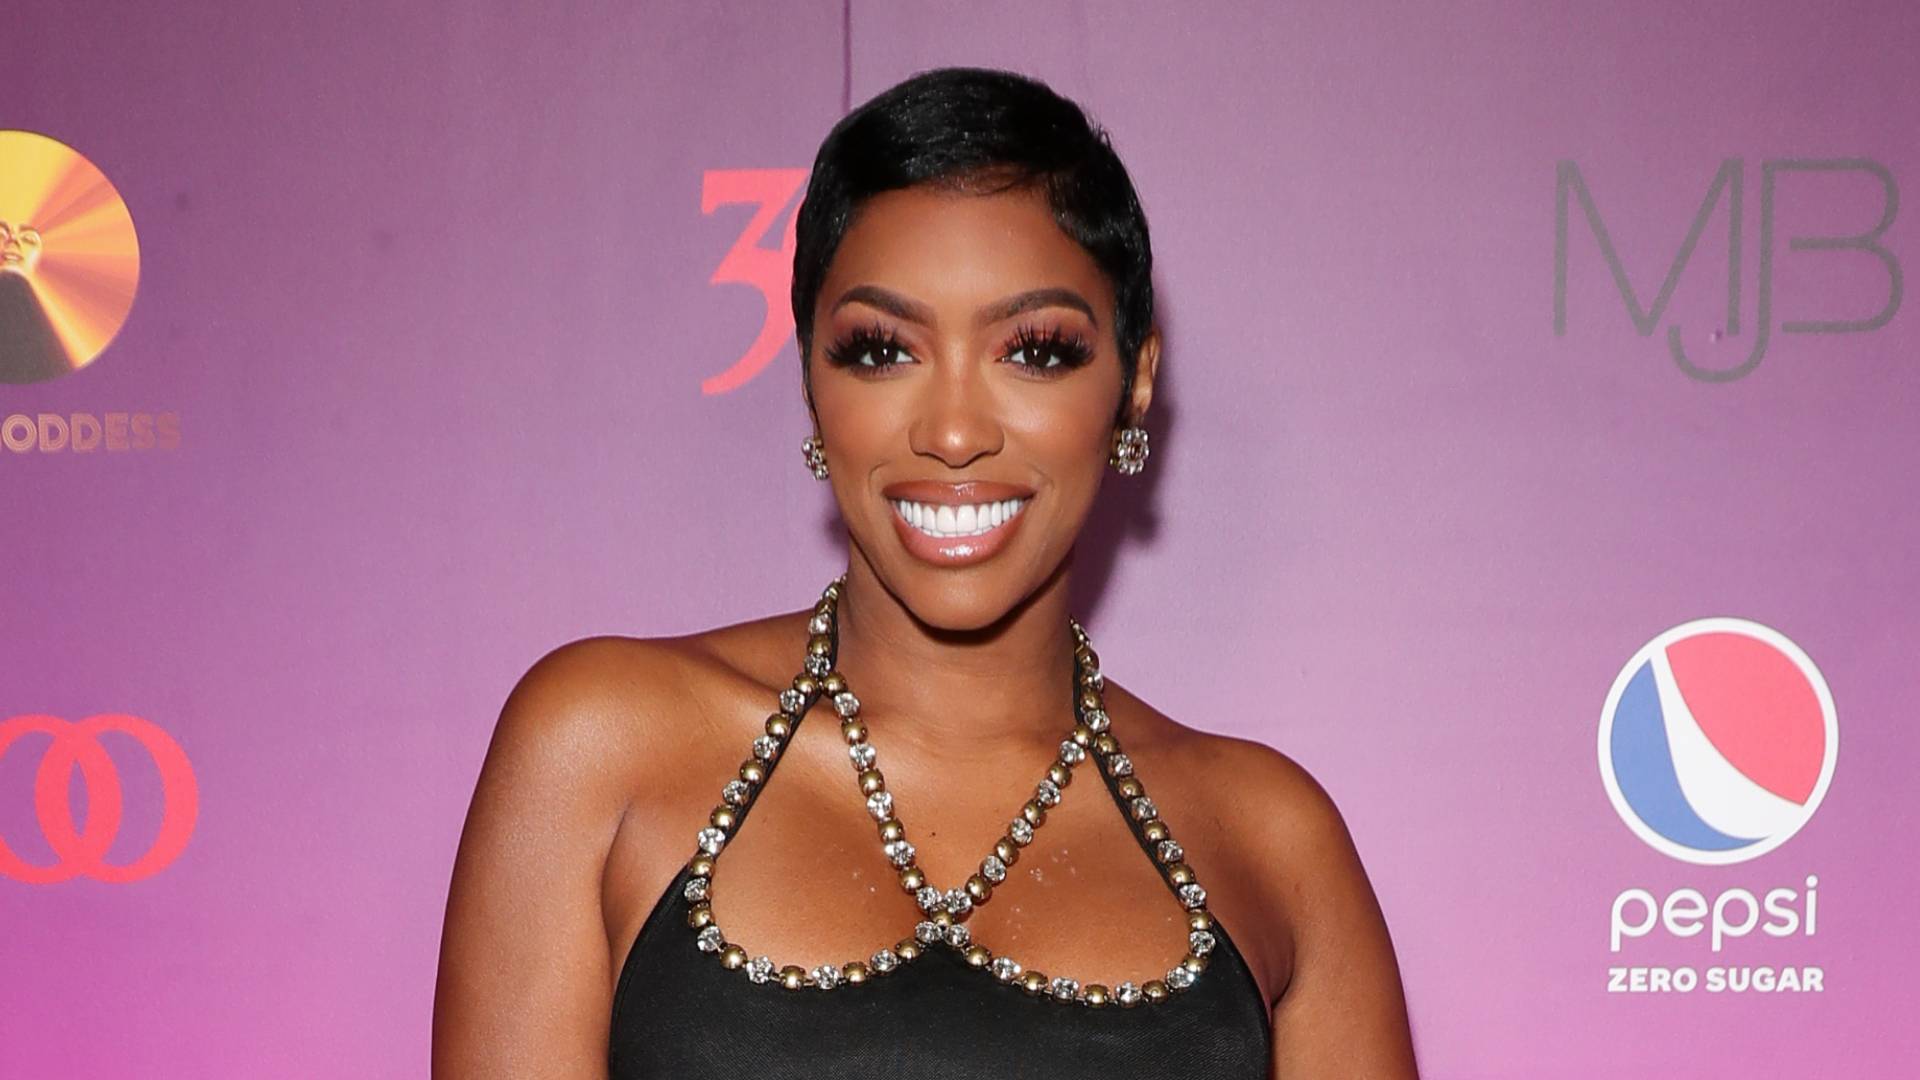 Porsha Williams attends Mary J. Blige Album Release Party For "Good Morning Gorgeous" at The Classic Cat on February 10, 2022 in West Hollywood, California. 